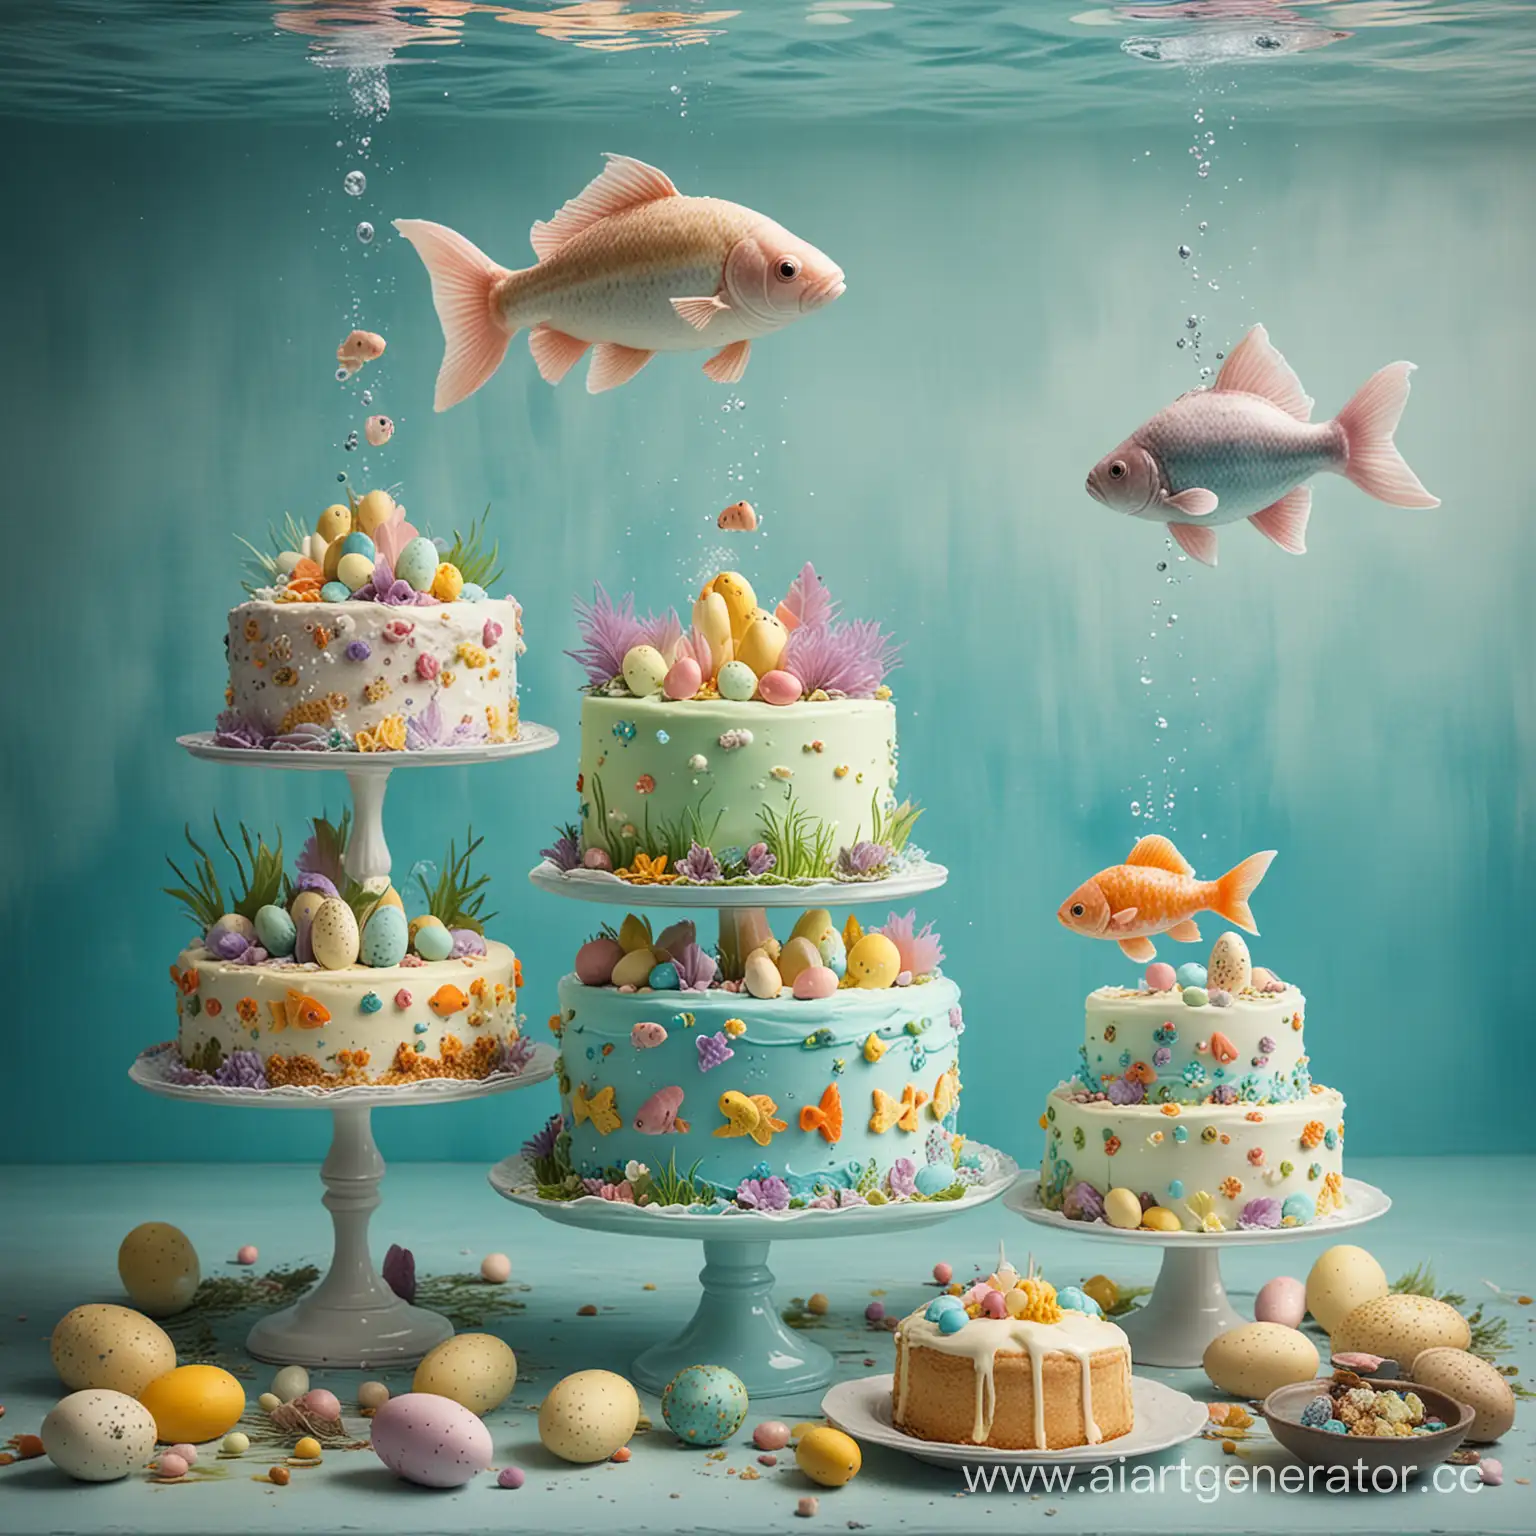 Underwater-Easter-Cake-Decorated-with-Fish-Festive-Dessert-Submerged-in-Aquatic-Scene